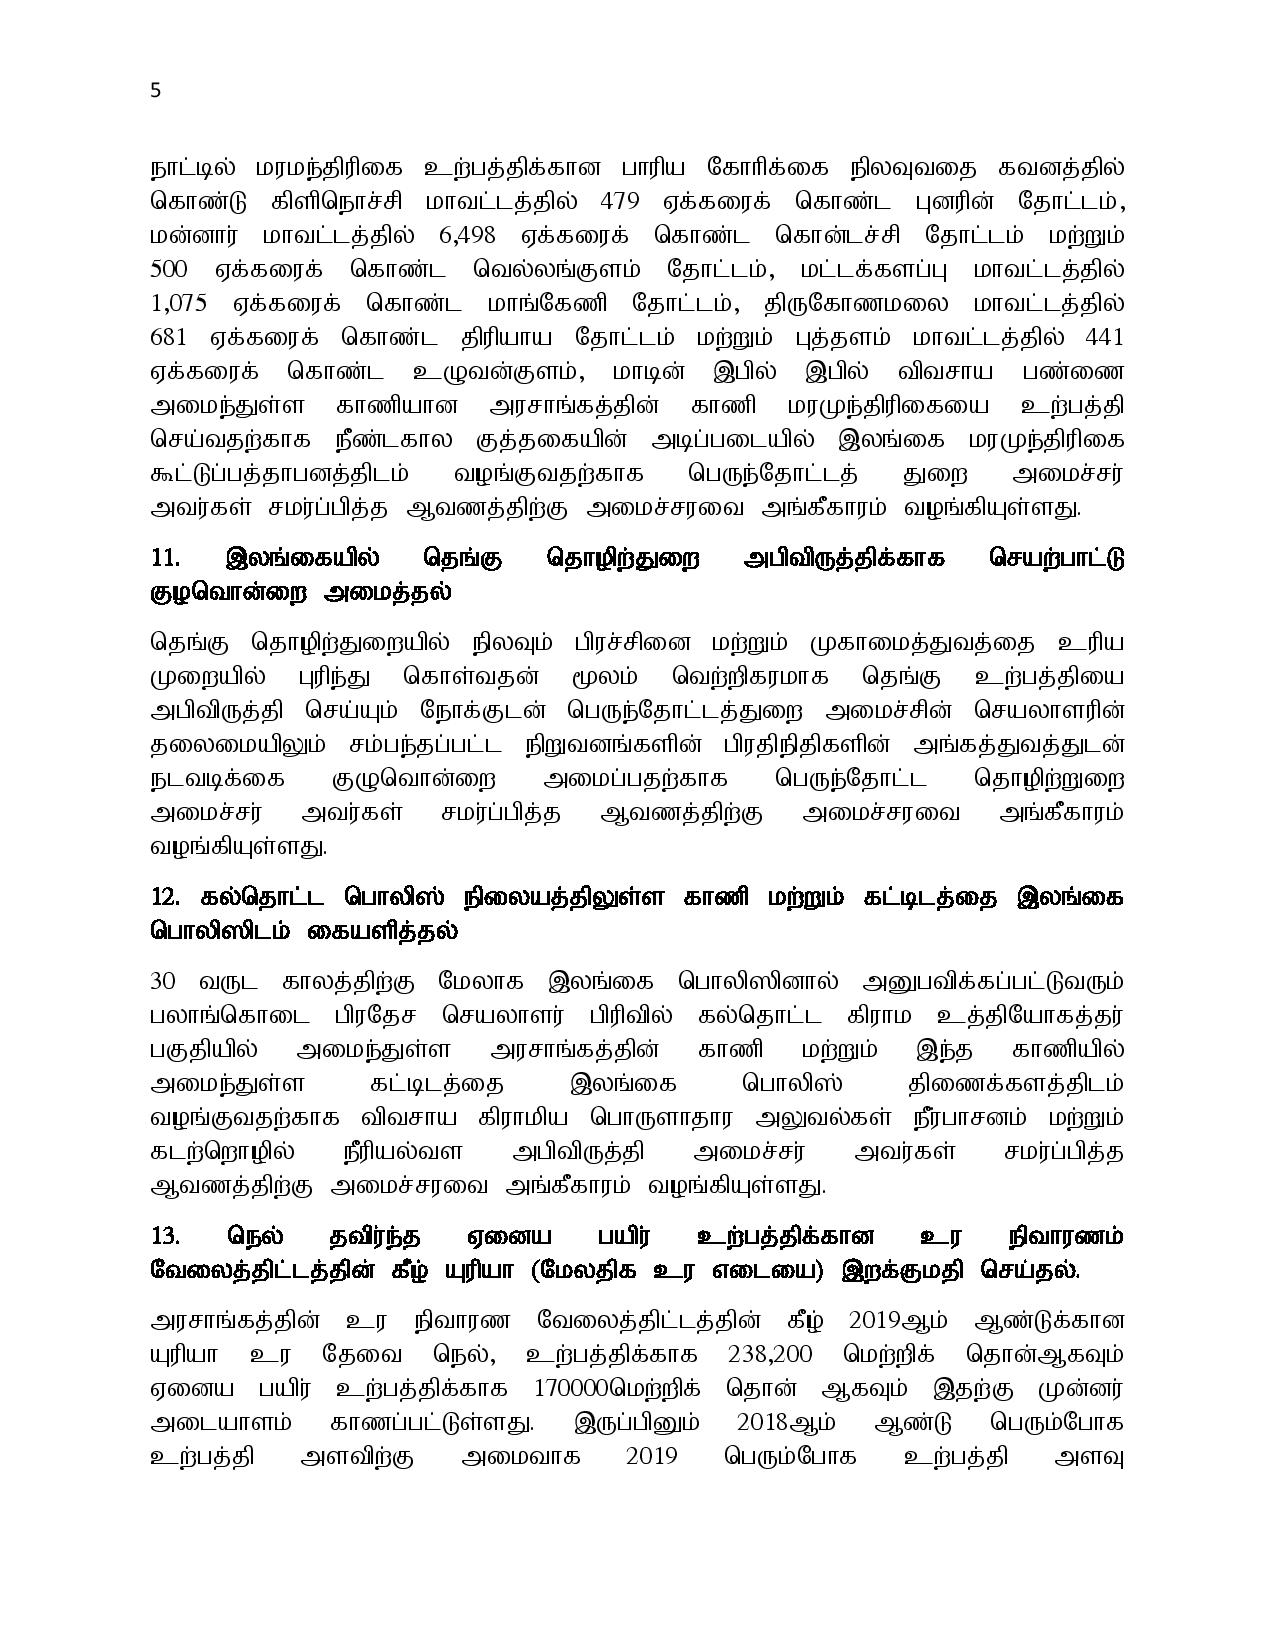 29.10.2019 cabinet tamil page 005